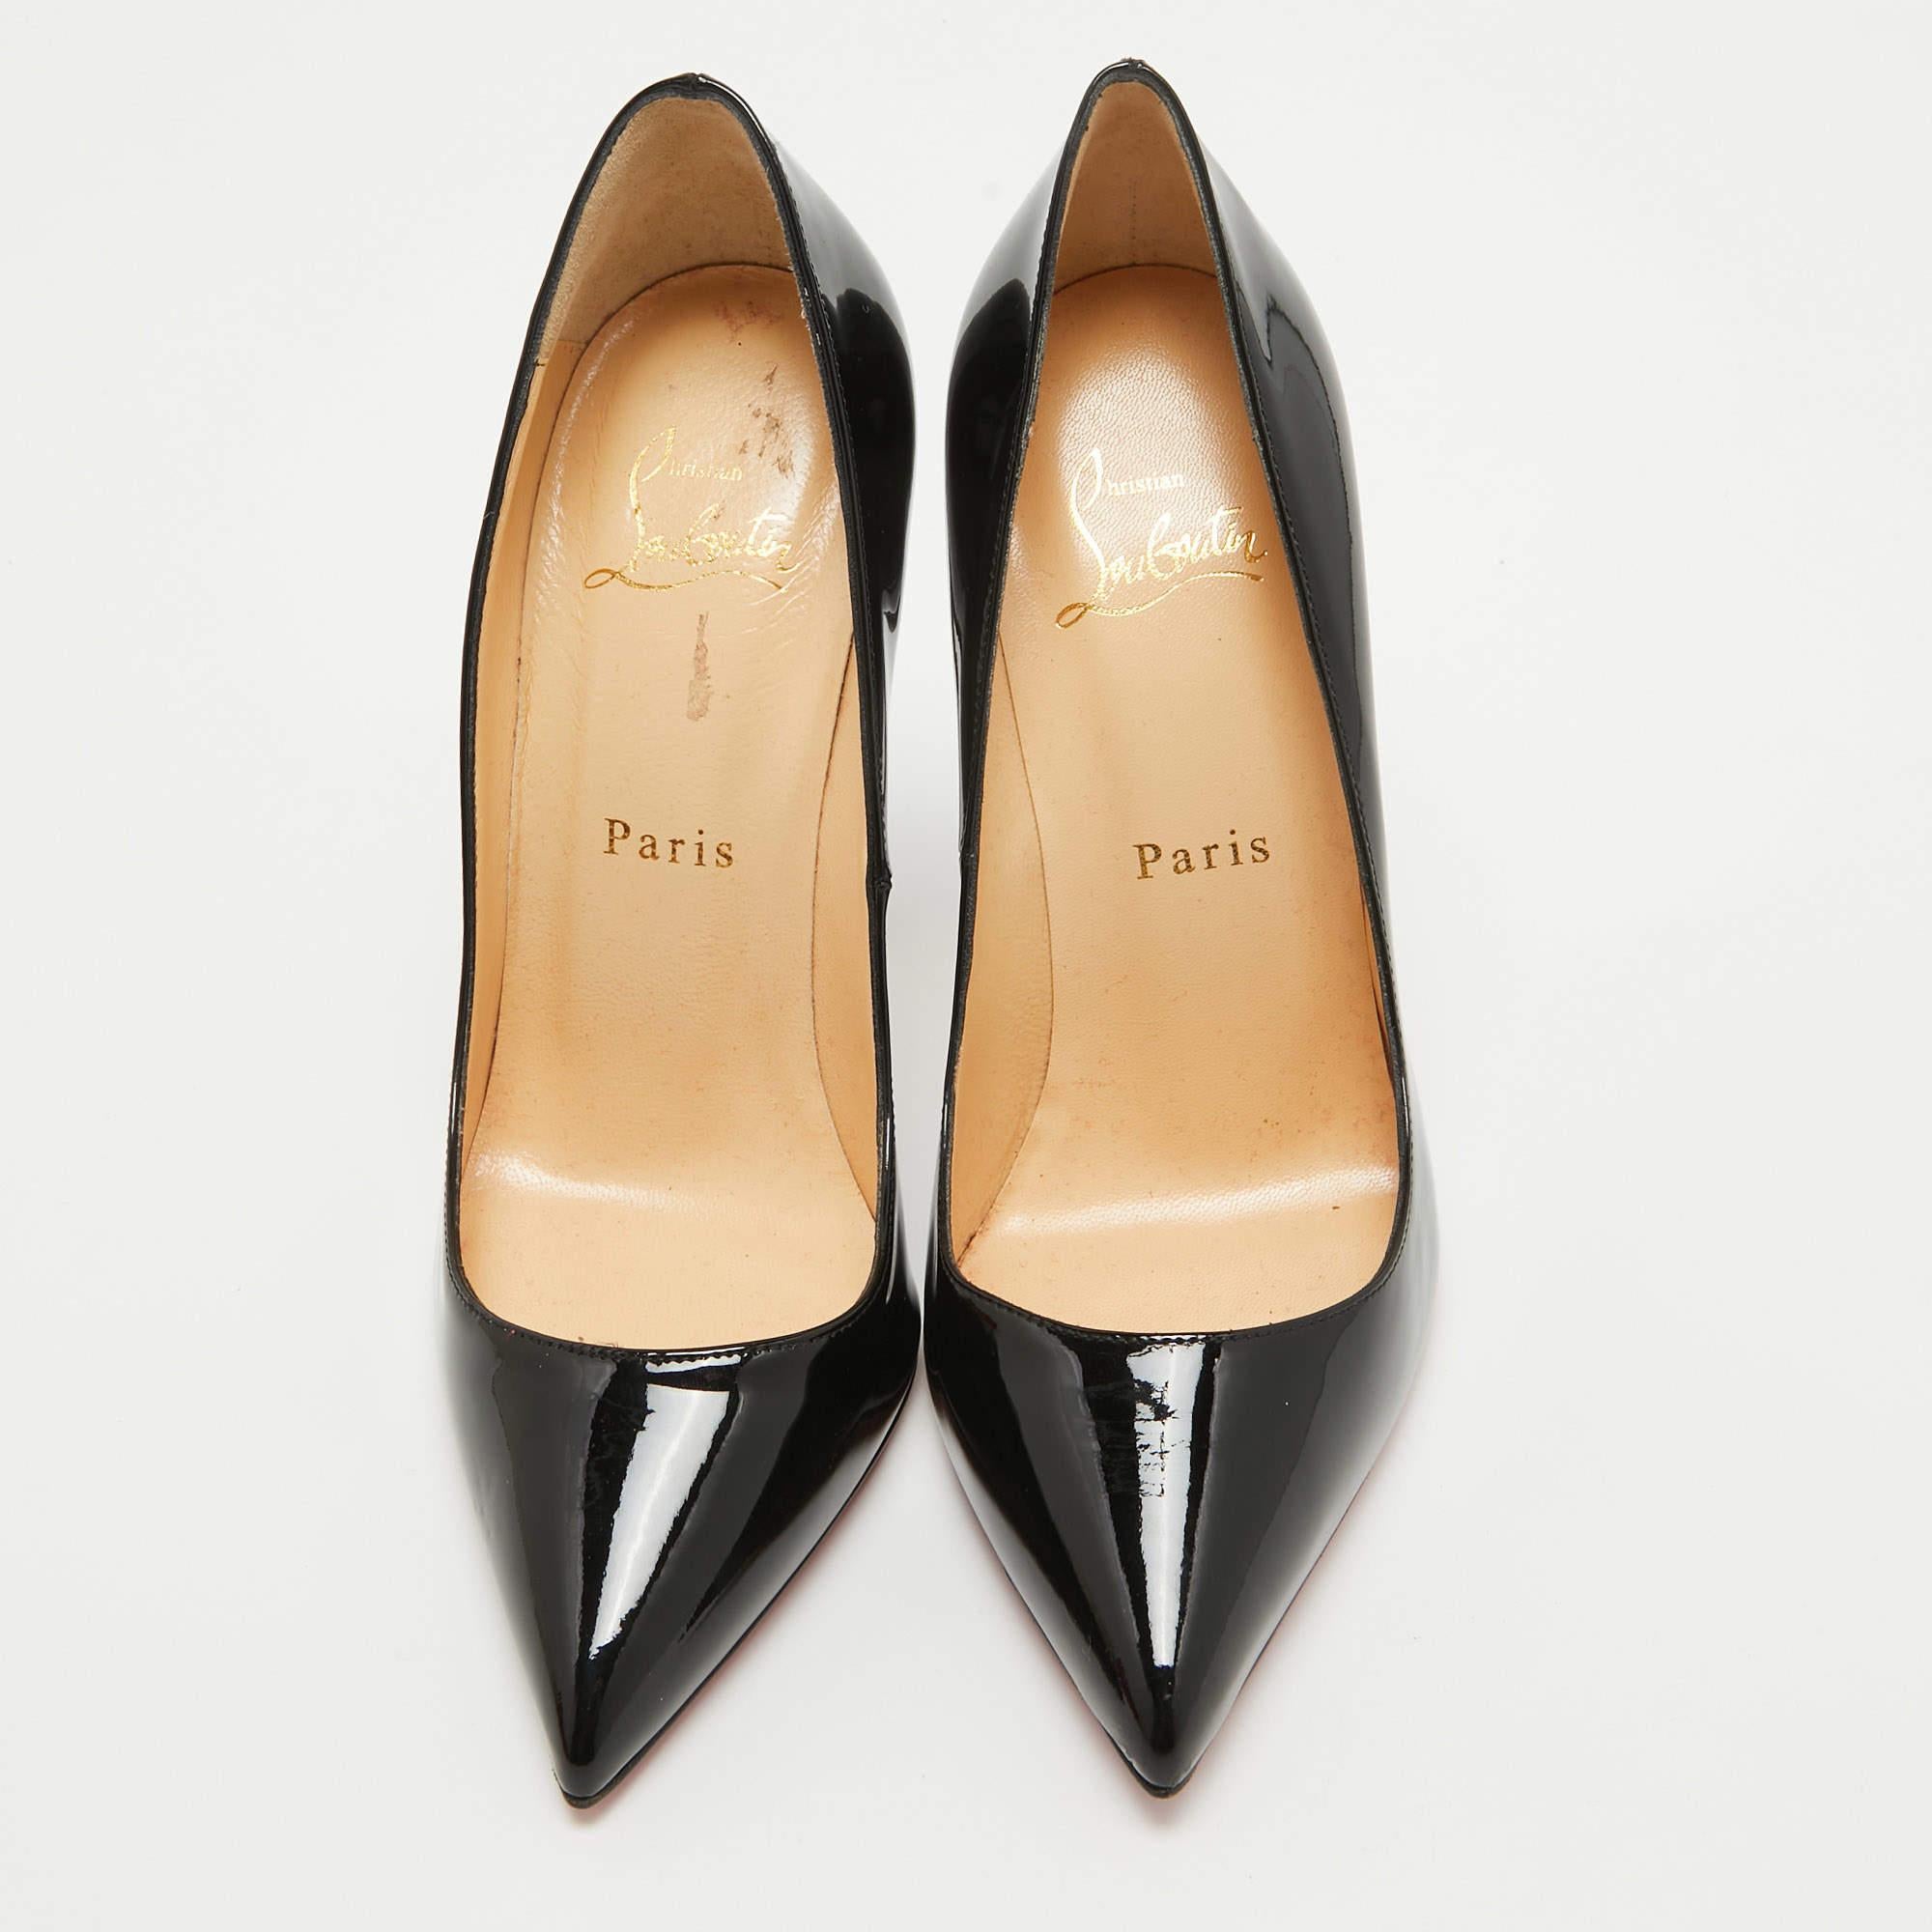 Make a chic style statement with these designer pumps. They showcase sturdy heels and durable soles, perfect for your fashionable outings!

Includes
Original Dustbag